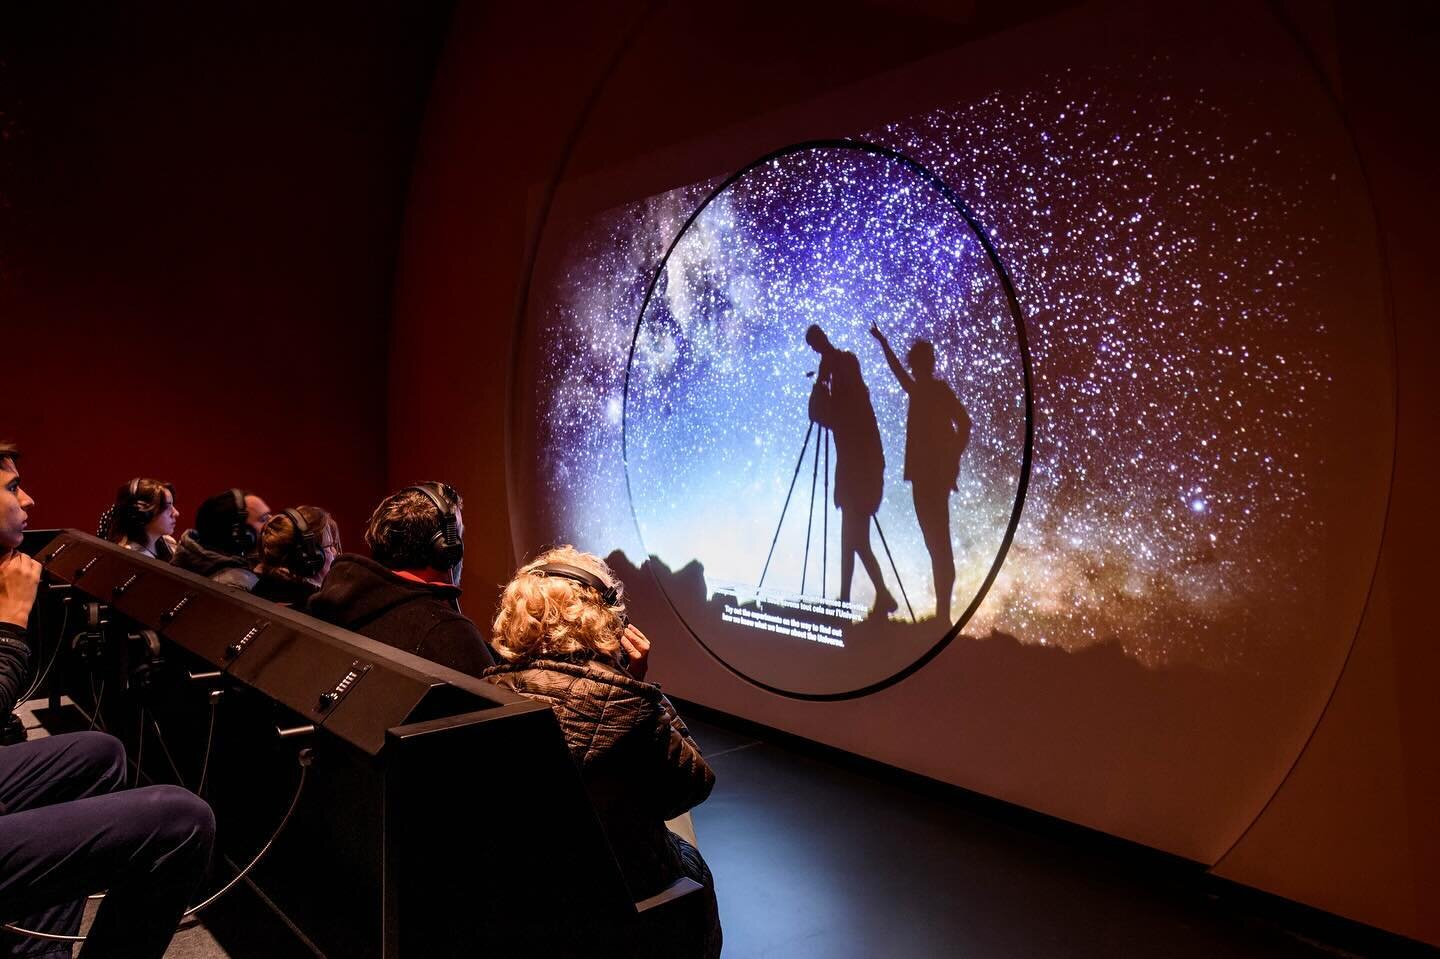 @cern, one of the world&rsquo;s leading scientific research laboratories, has recently opened the Science Gateway. It&rsquo;s a new education and outreach centre where visitors can engage in CERN&rsquo;s discoveries, science, and technologies. 

One 